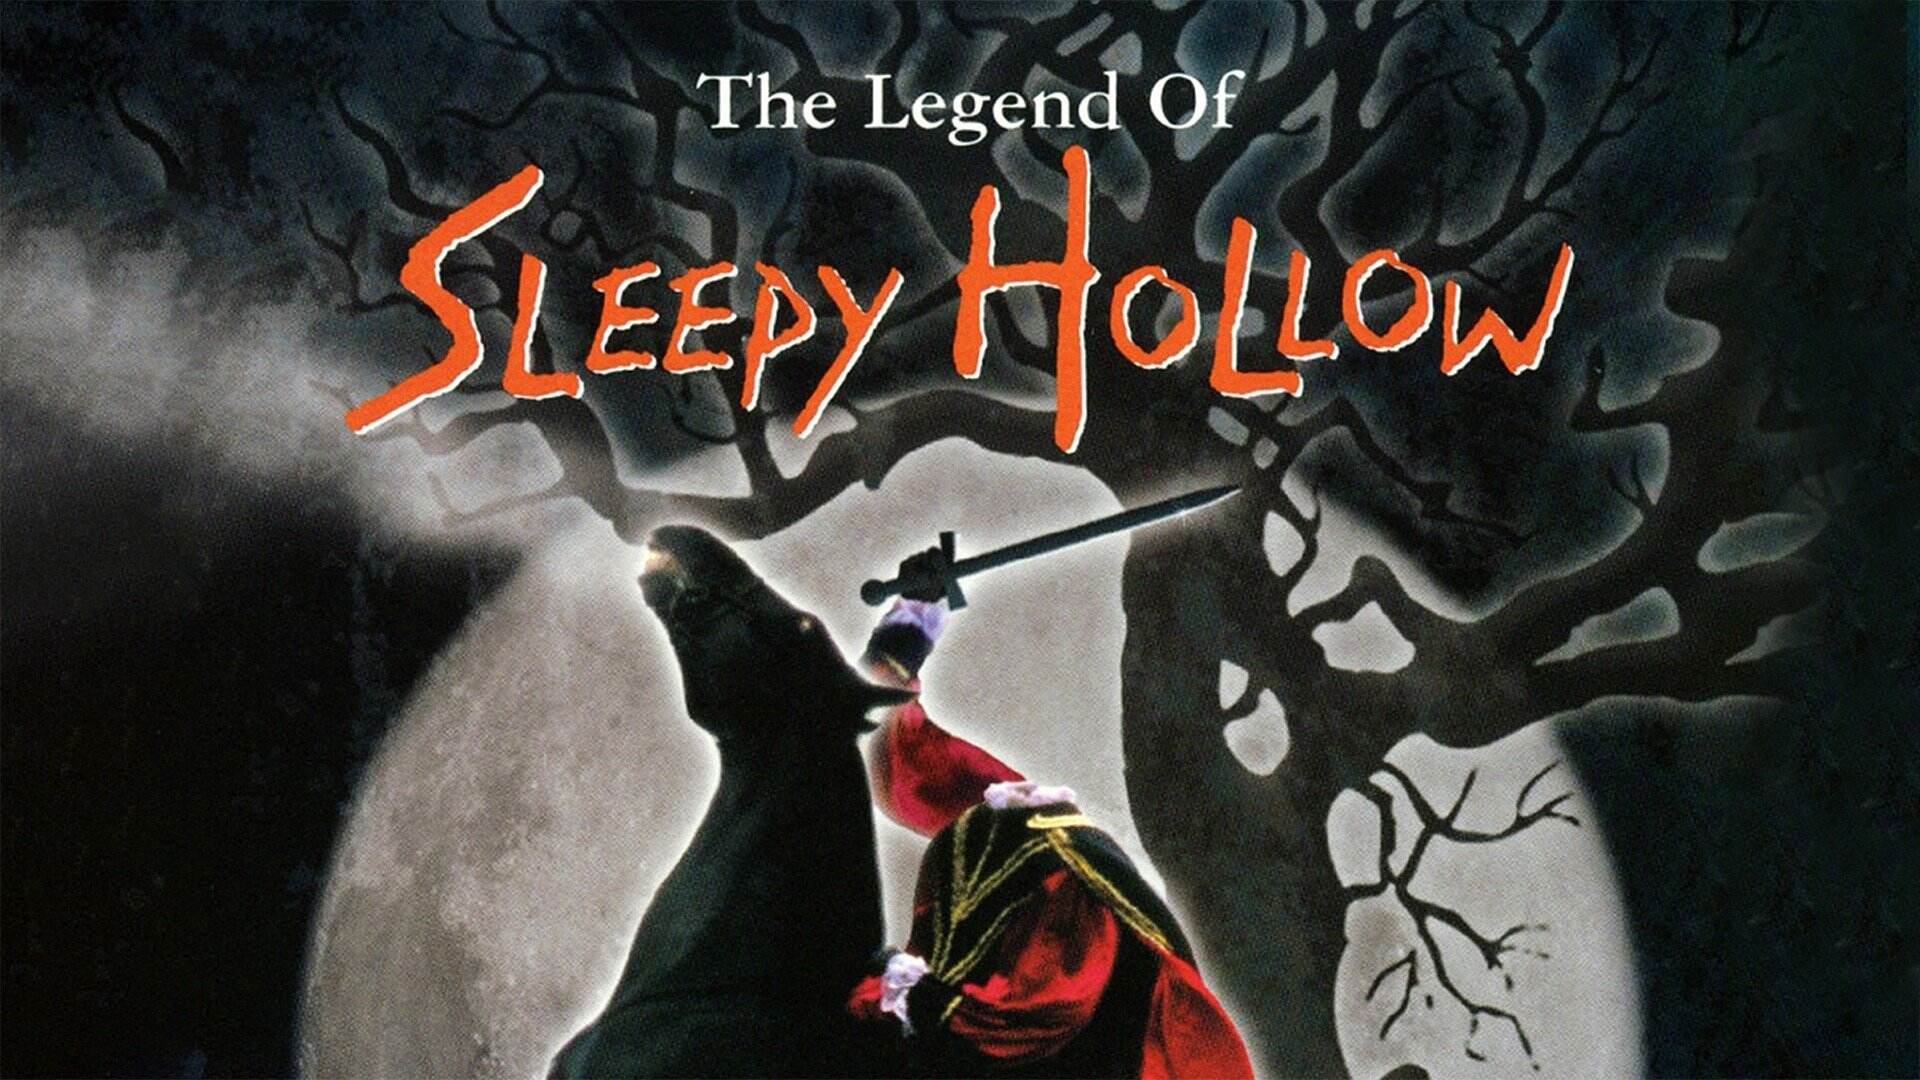 48-facts-about-the-movie-the-legend-of-sleepy-hollow